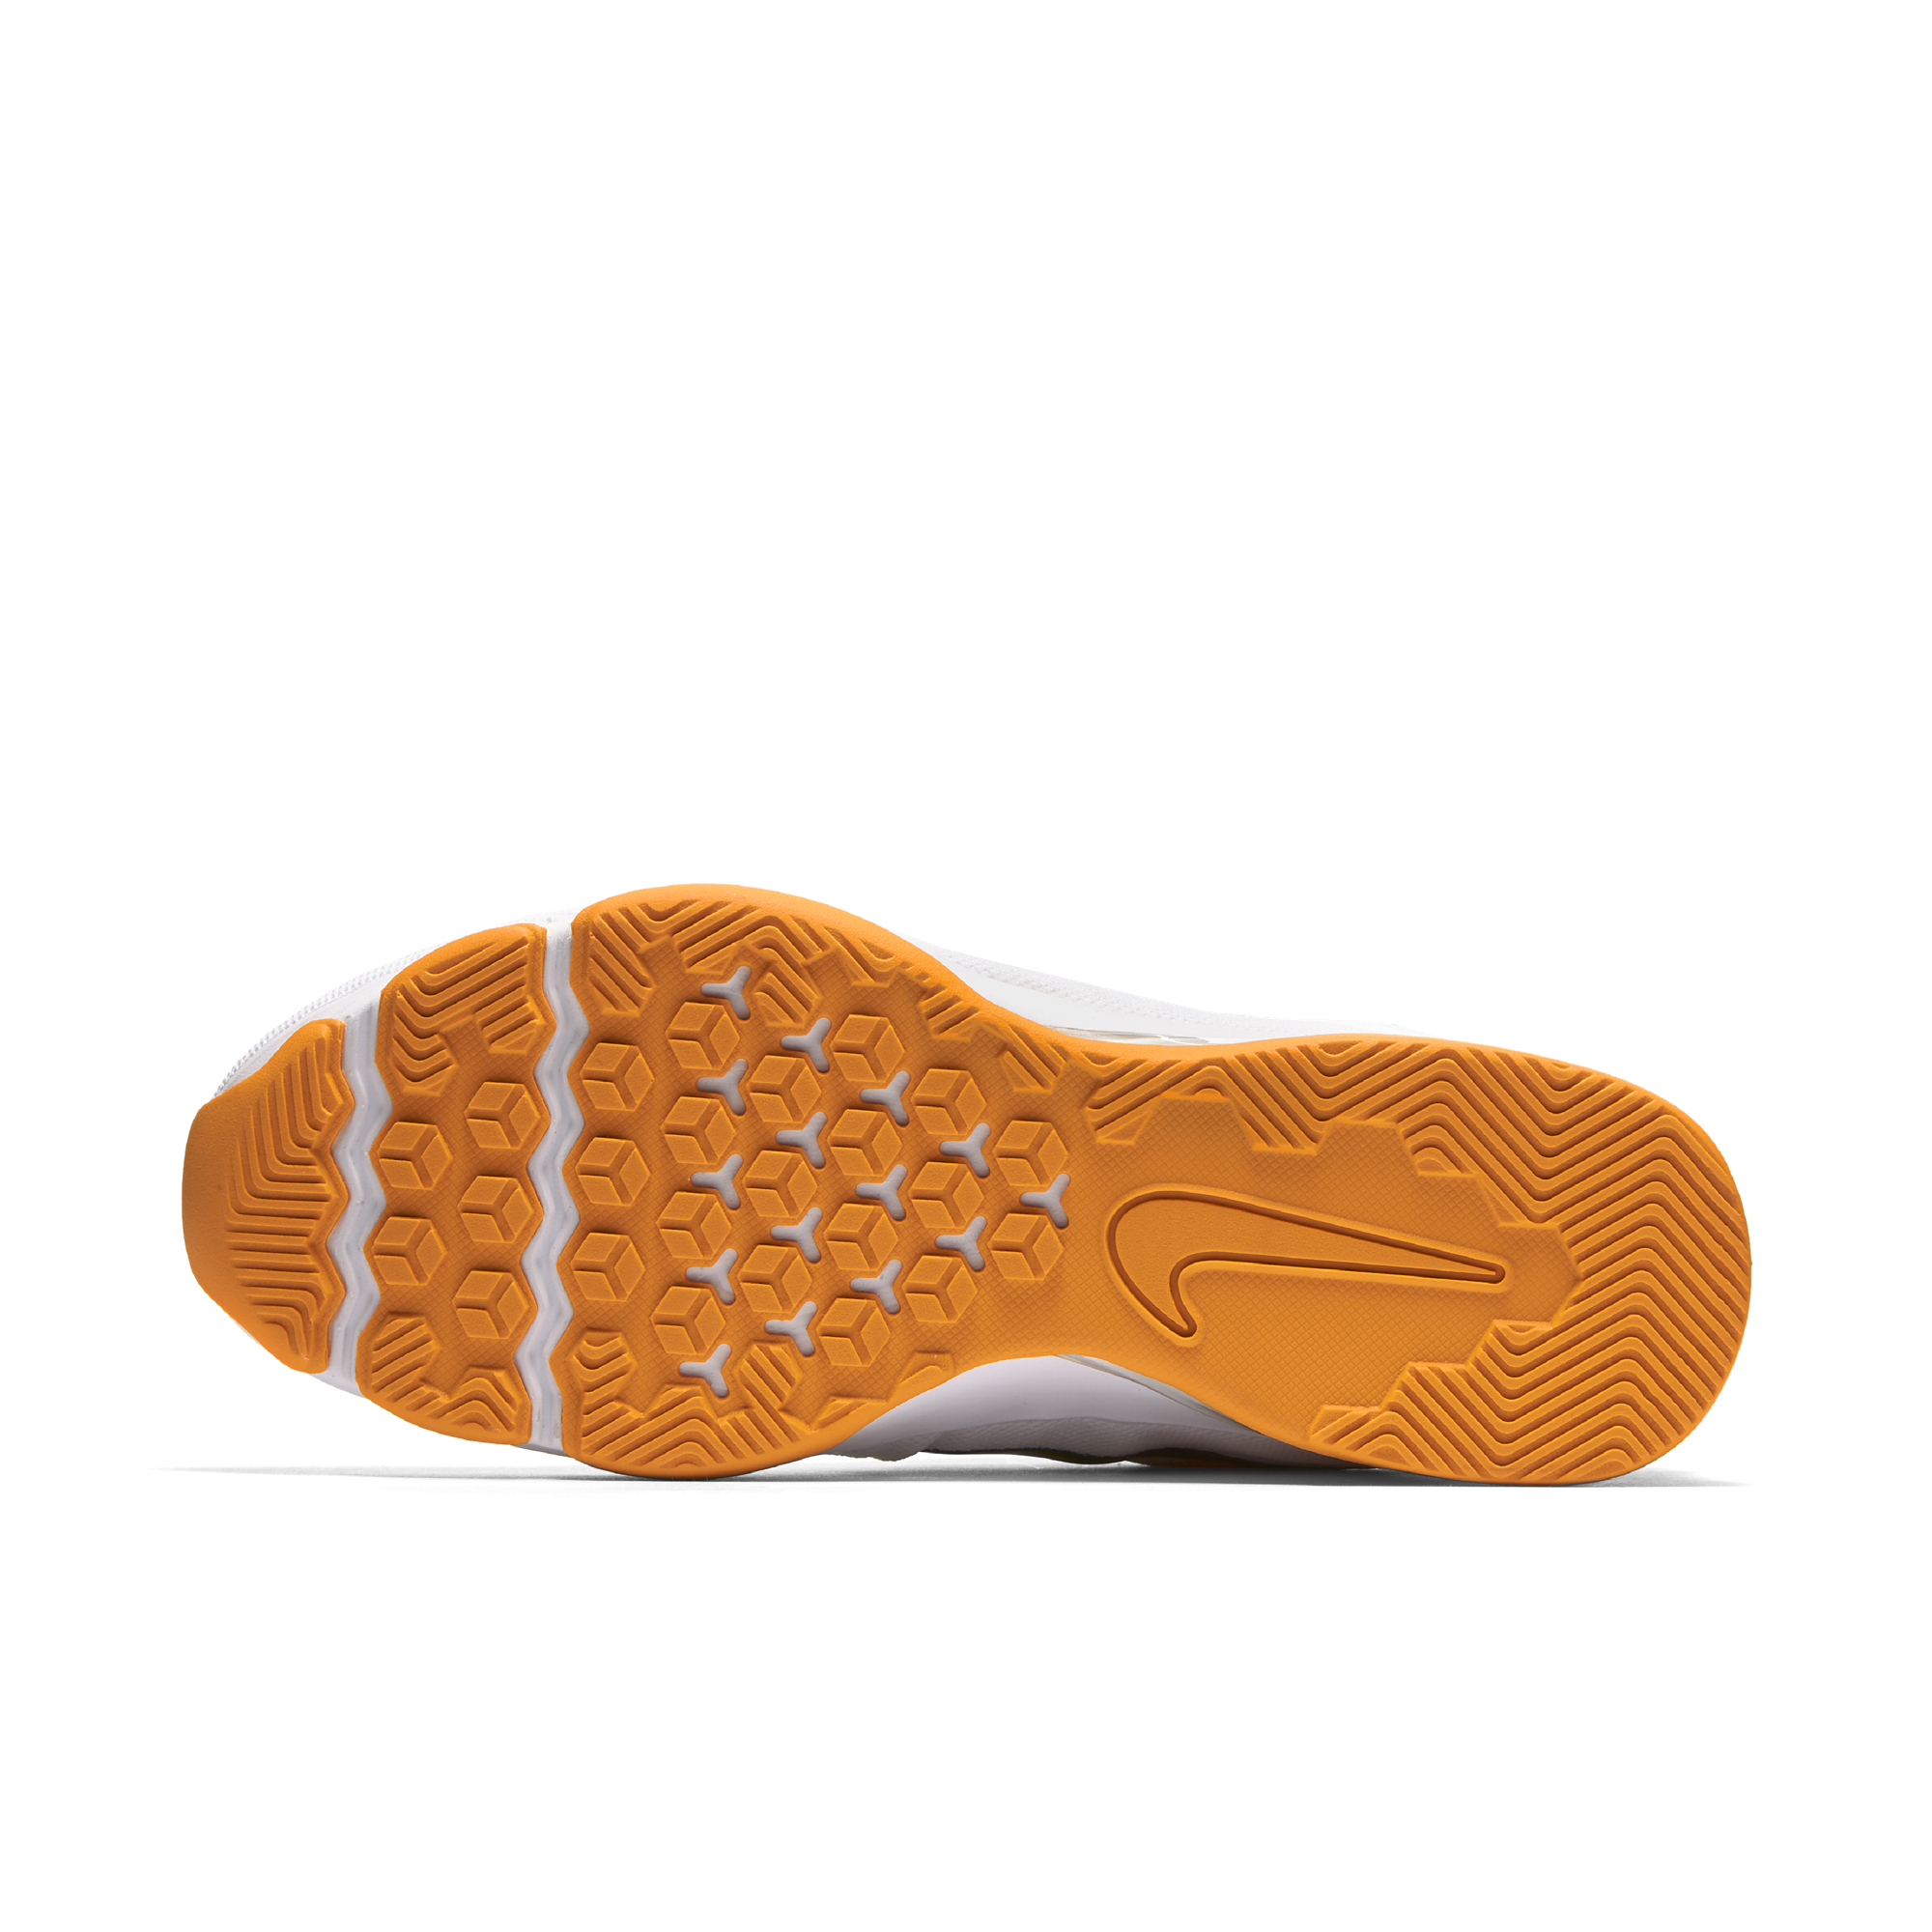 New Tennessee Nike shoes on sale Monday at 10 am - FreakNotes